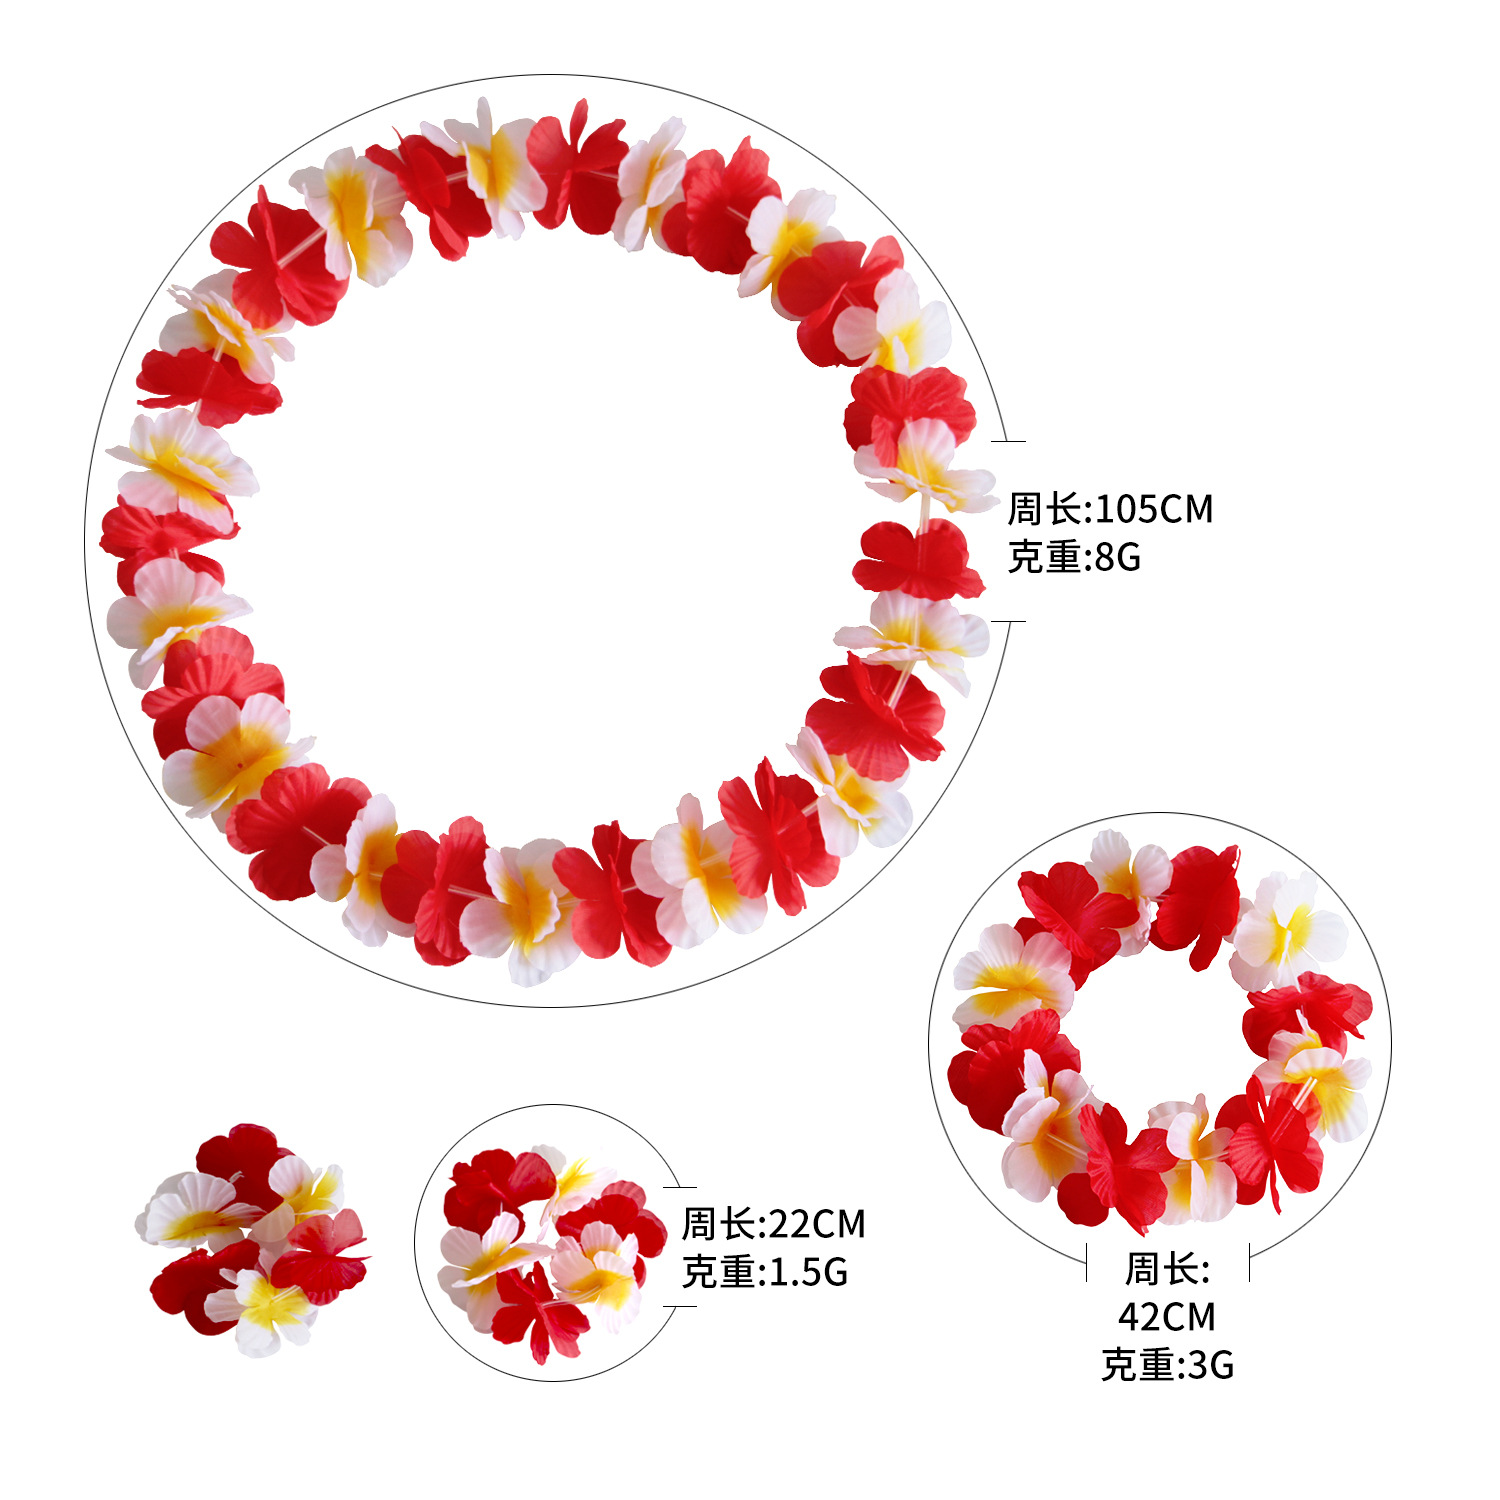 Hawaii Two-Tone Petal Classic Garland 40PCs Colorful Necklace Bracelet Wreath Party Prom Dress up Props